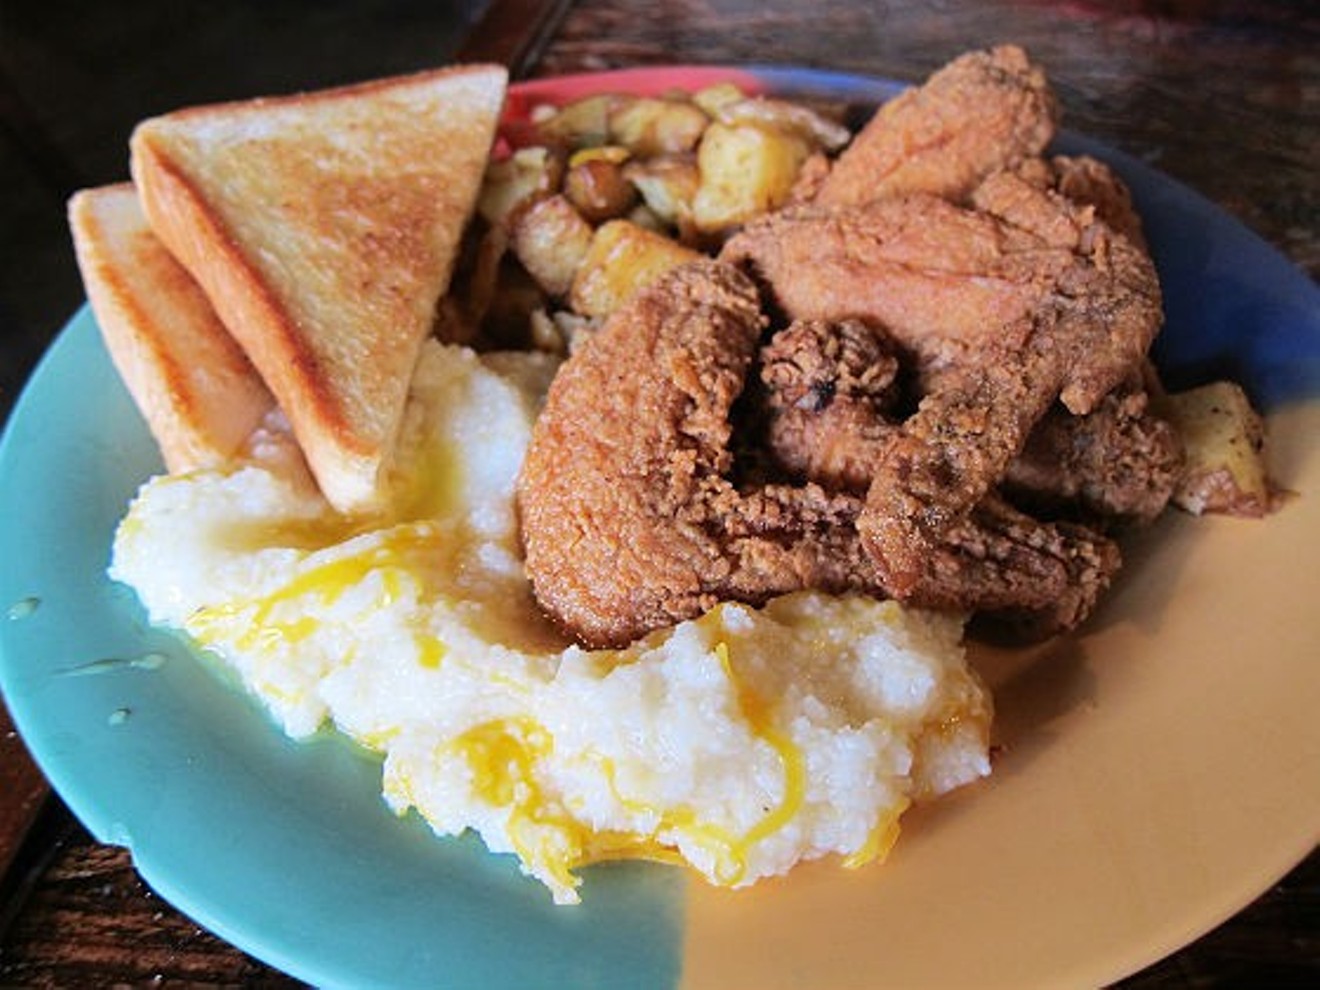 Will Kulture have The Breakfast Klub's famous grits?